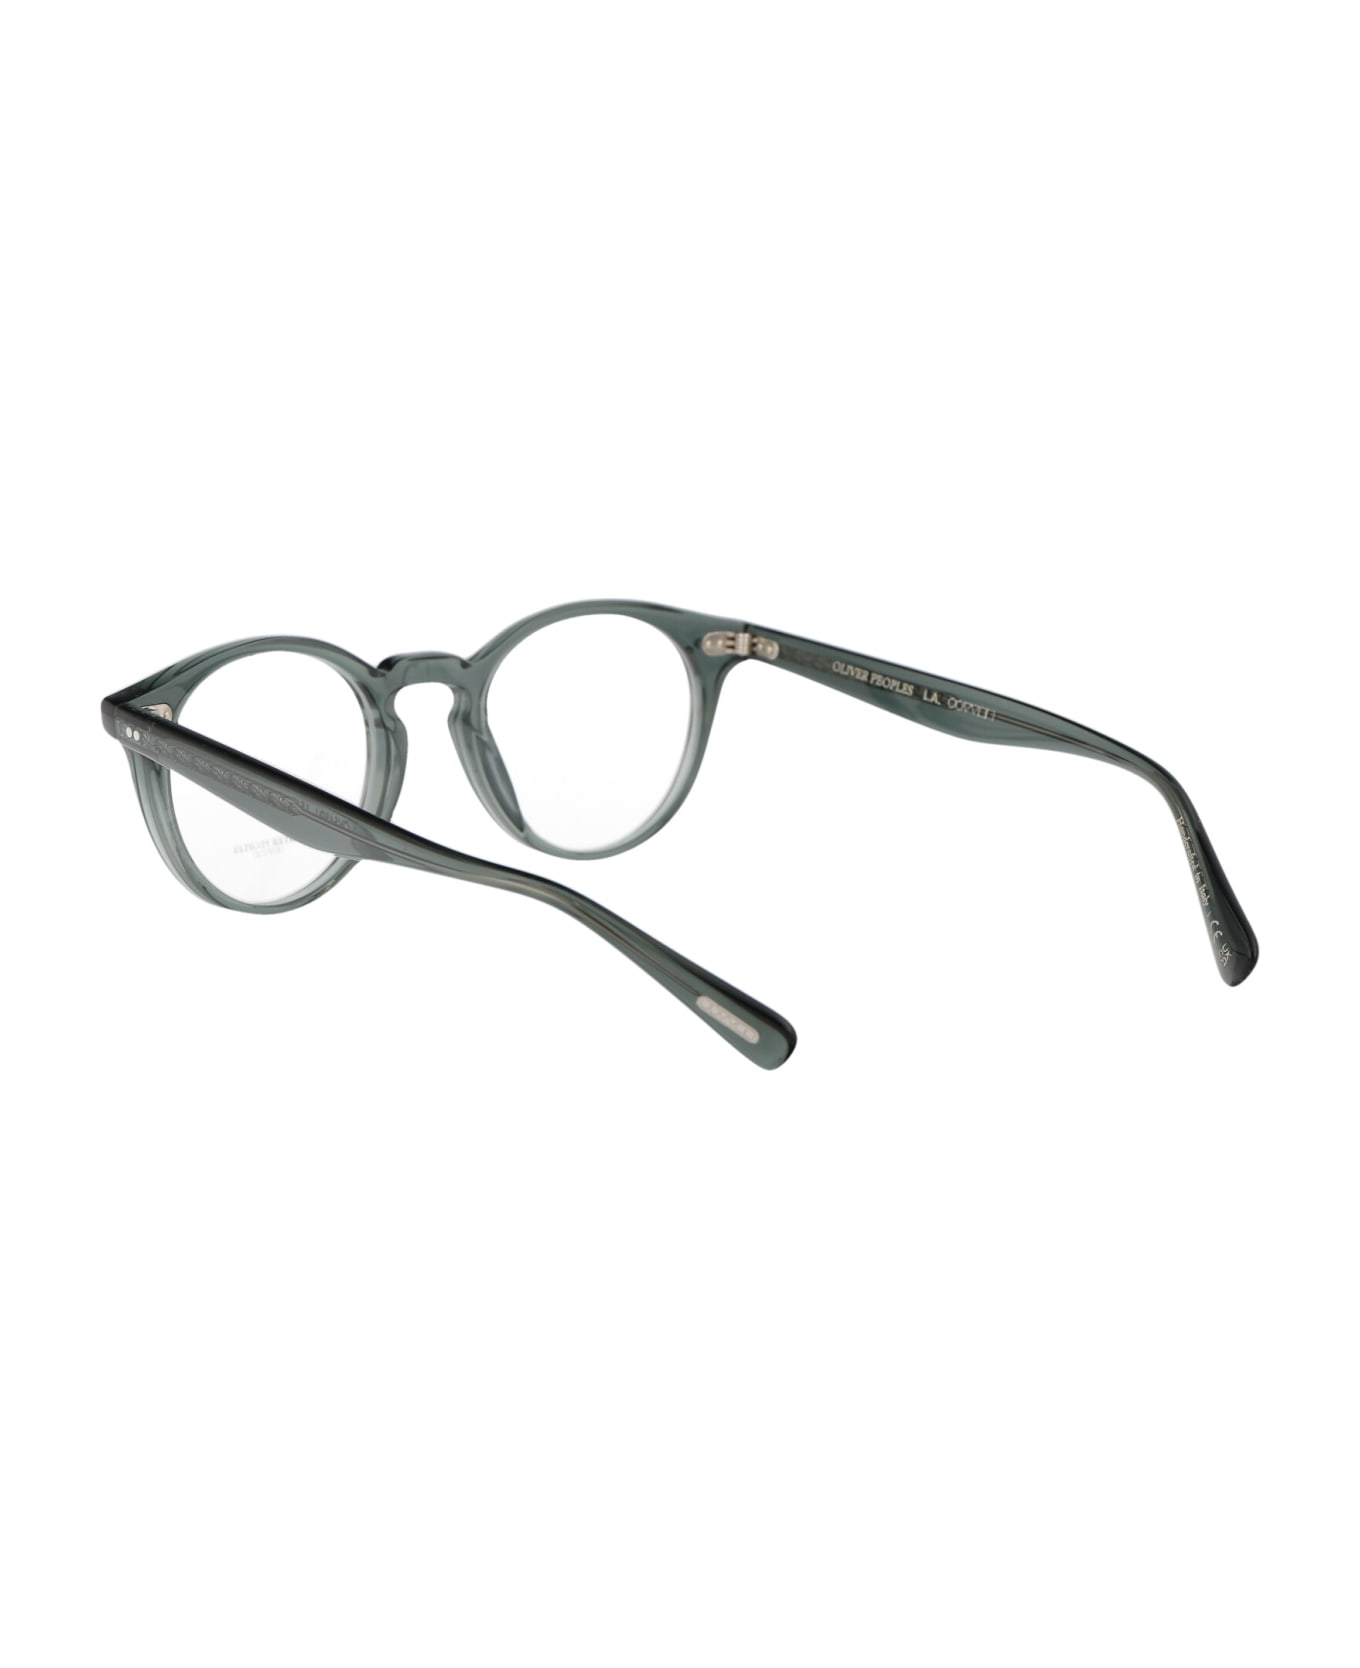 Oliver Peoples Romare Glasses - 1547 Ivy アイウェア